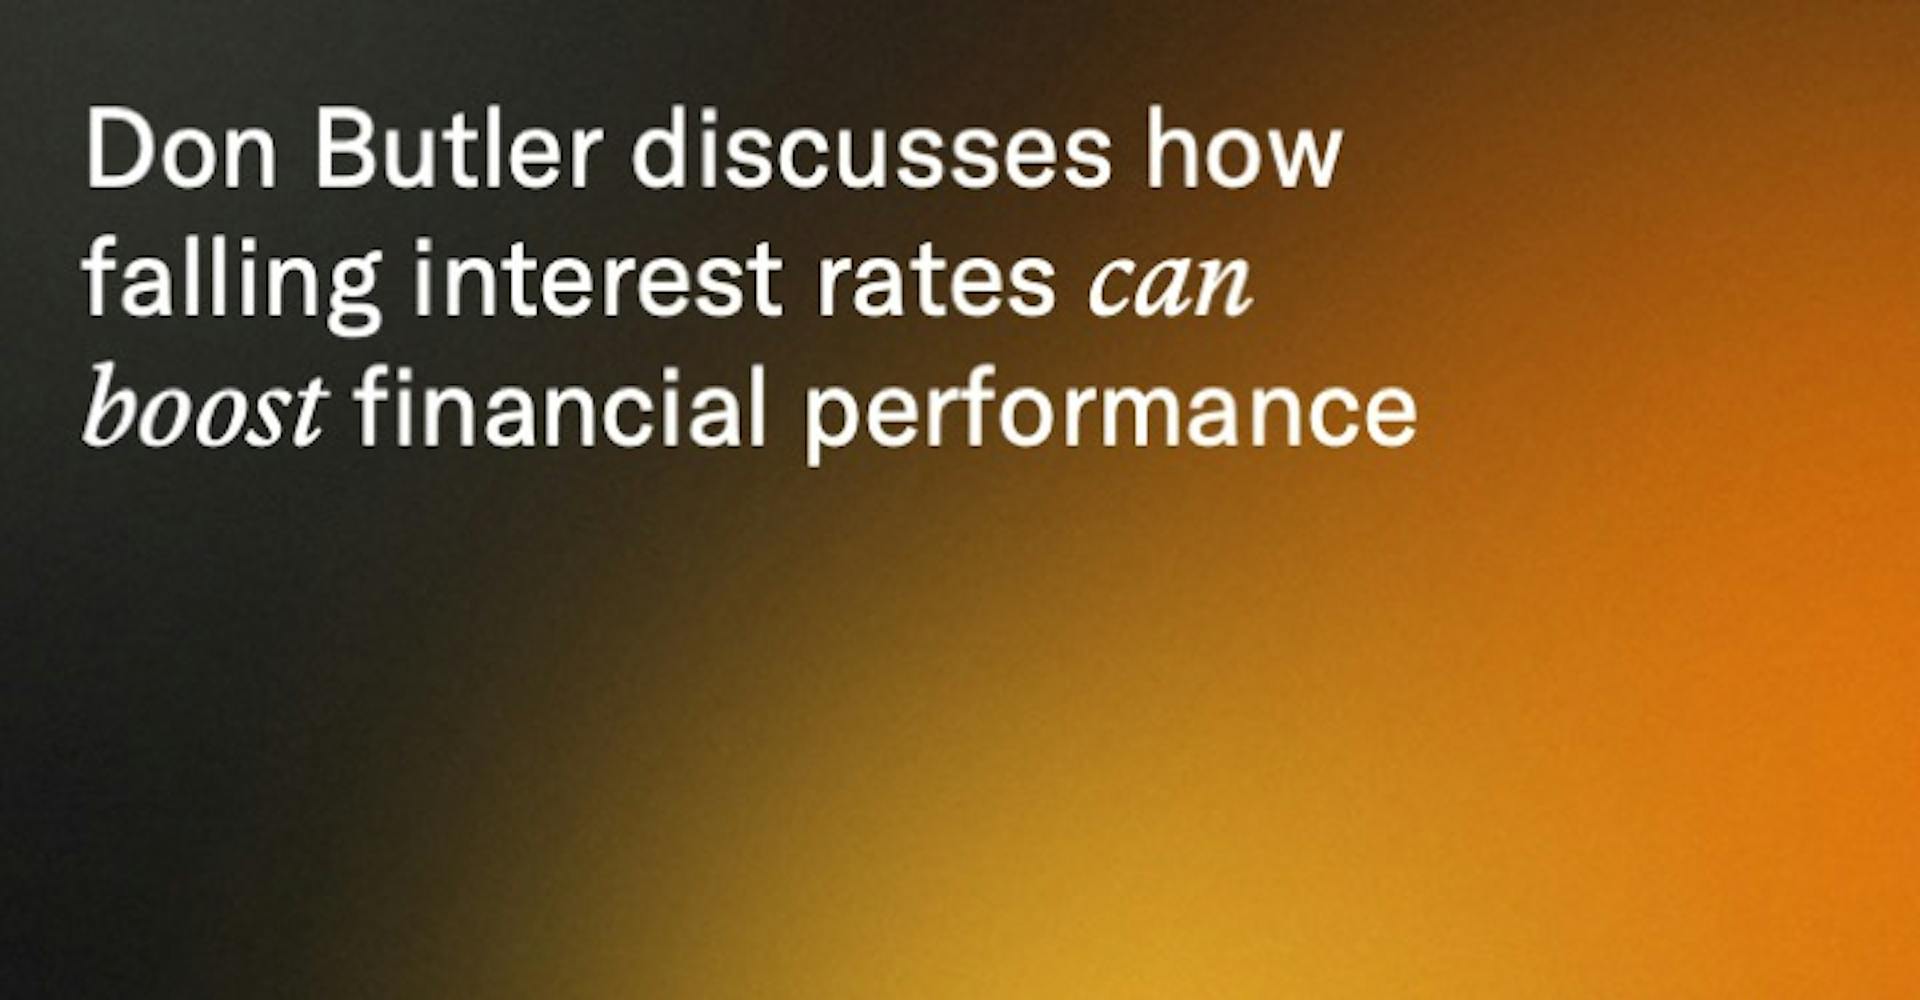 Don Butler discusses how falling interest rates can boost financial performance